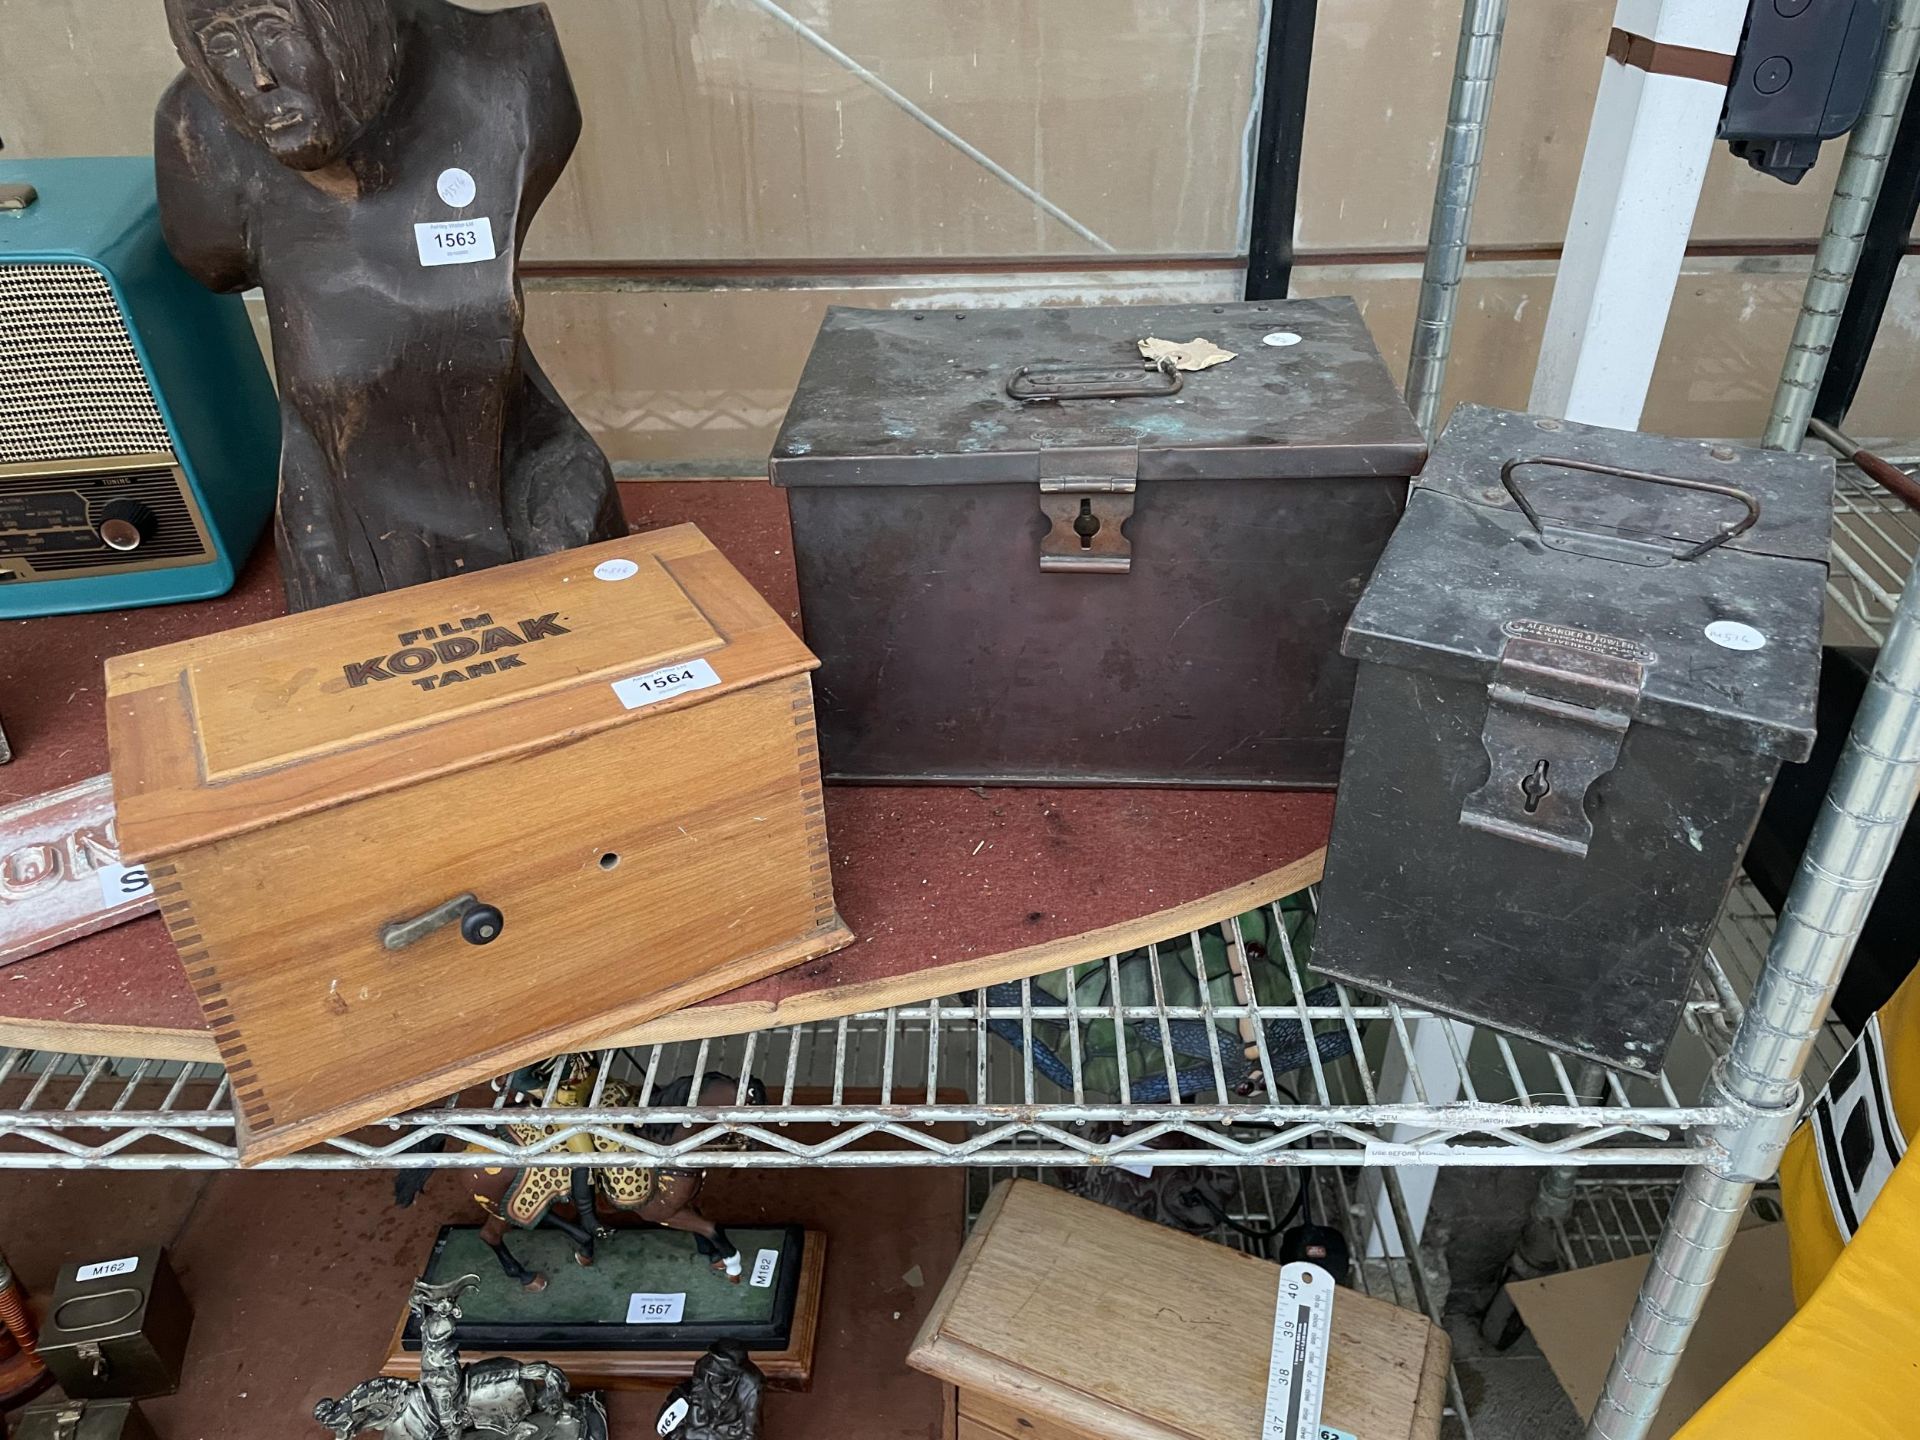 TWO METAL HOSPITAL BOXES AND A WOODEN KODAK FILM TANK